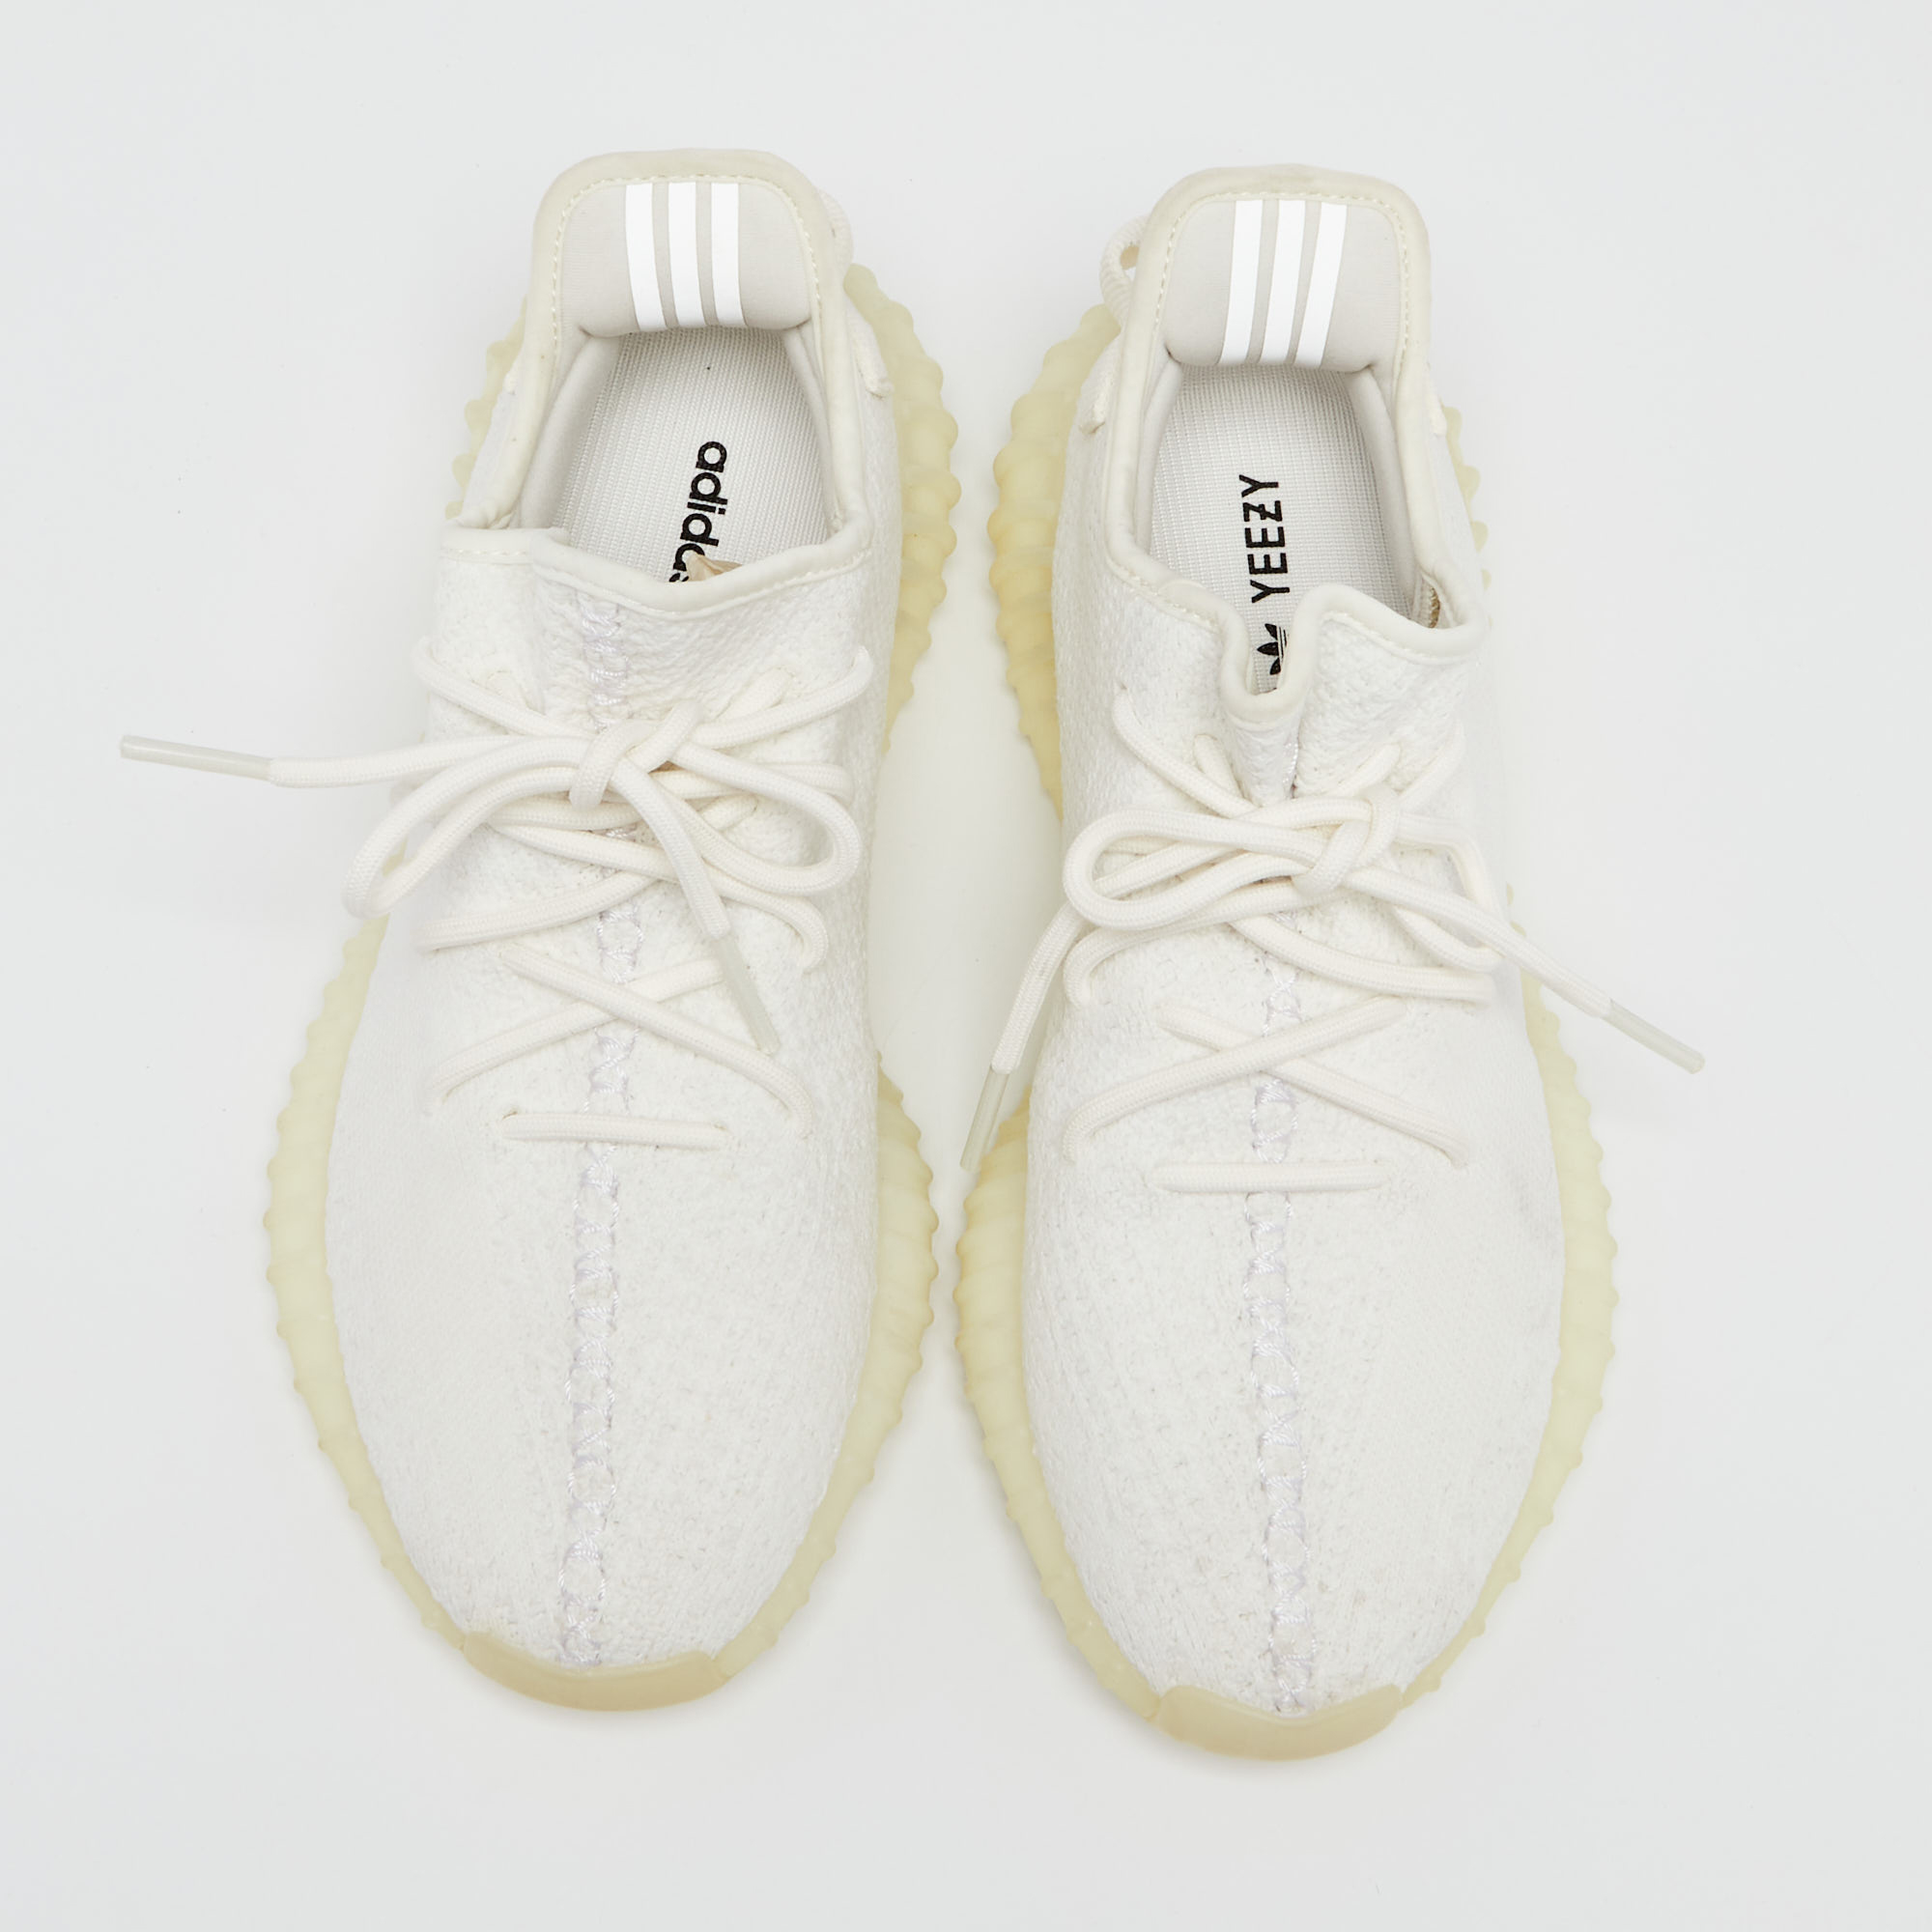 Yeezy X Adidas White Knit Fabric Boost 350 V2 Triple White Sneakers Size 42